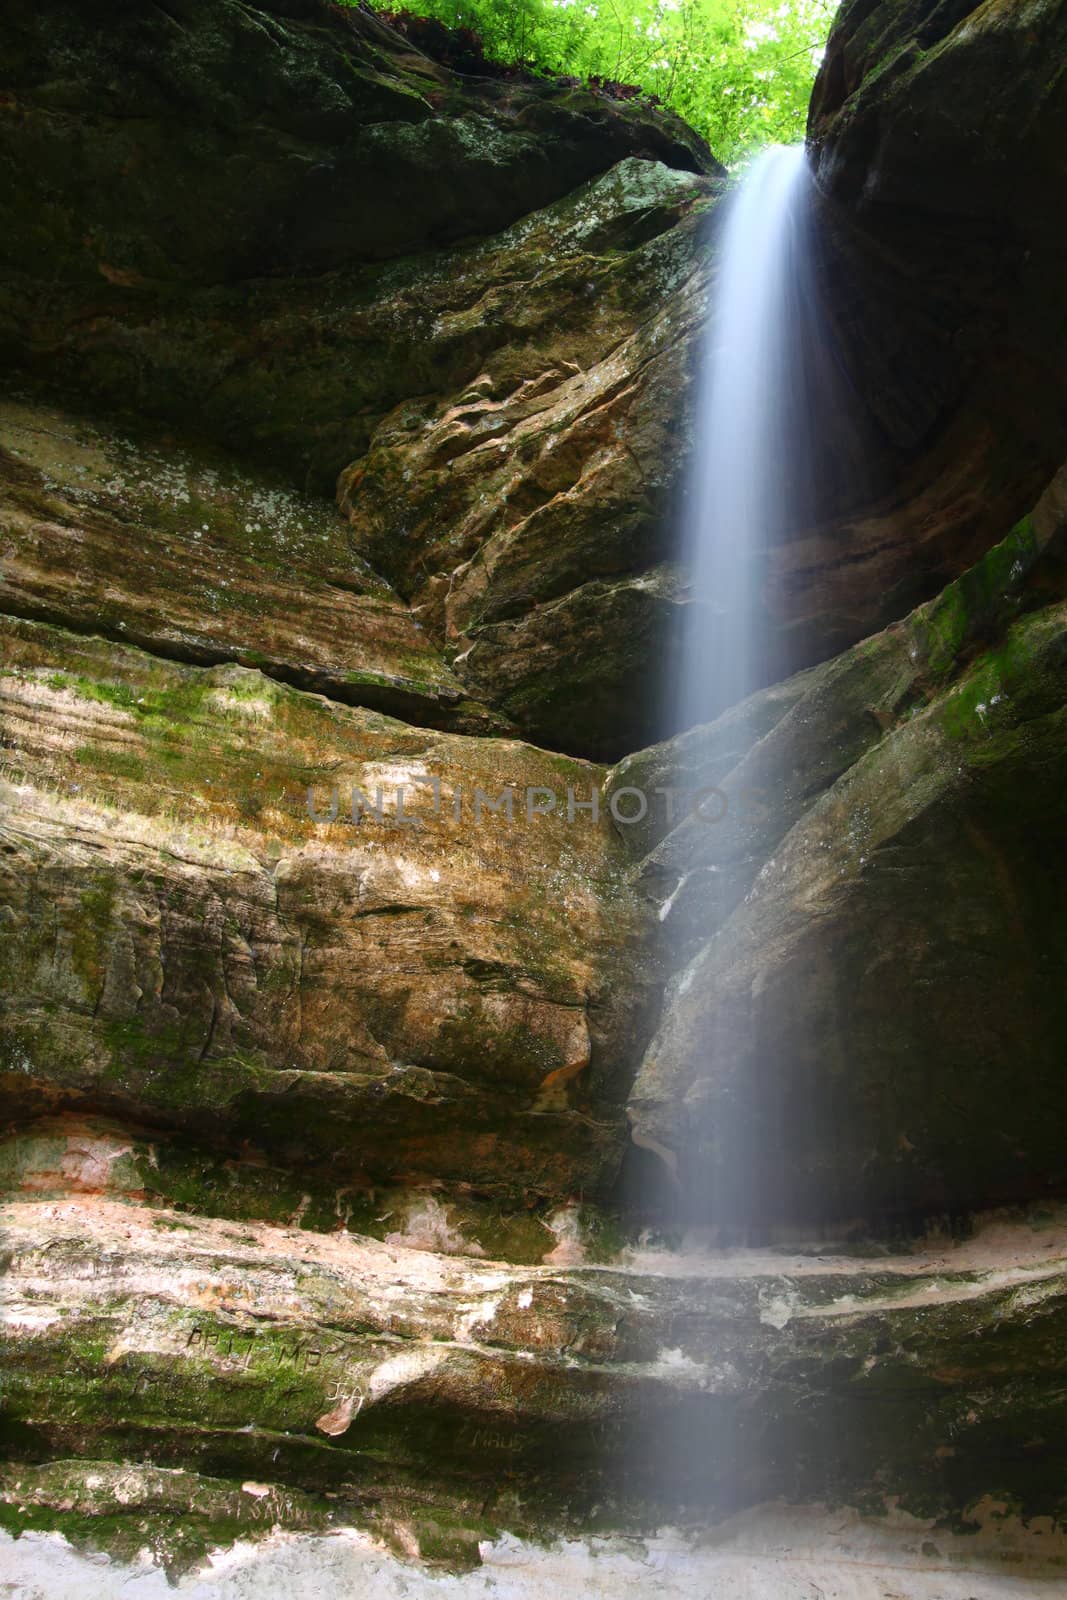 Owl Canyon - Starved Rock State Park by Wirepec